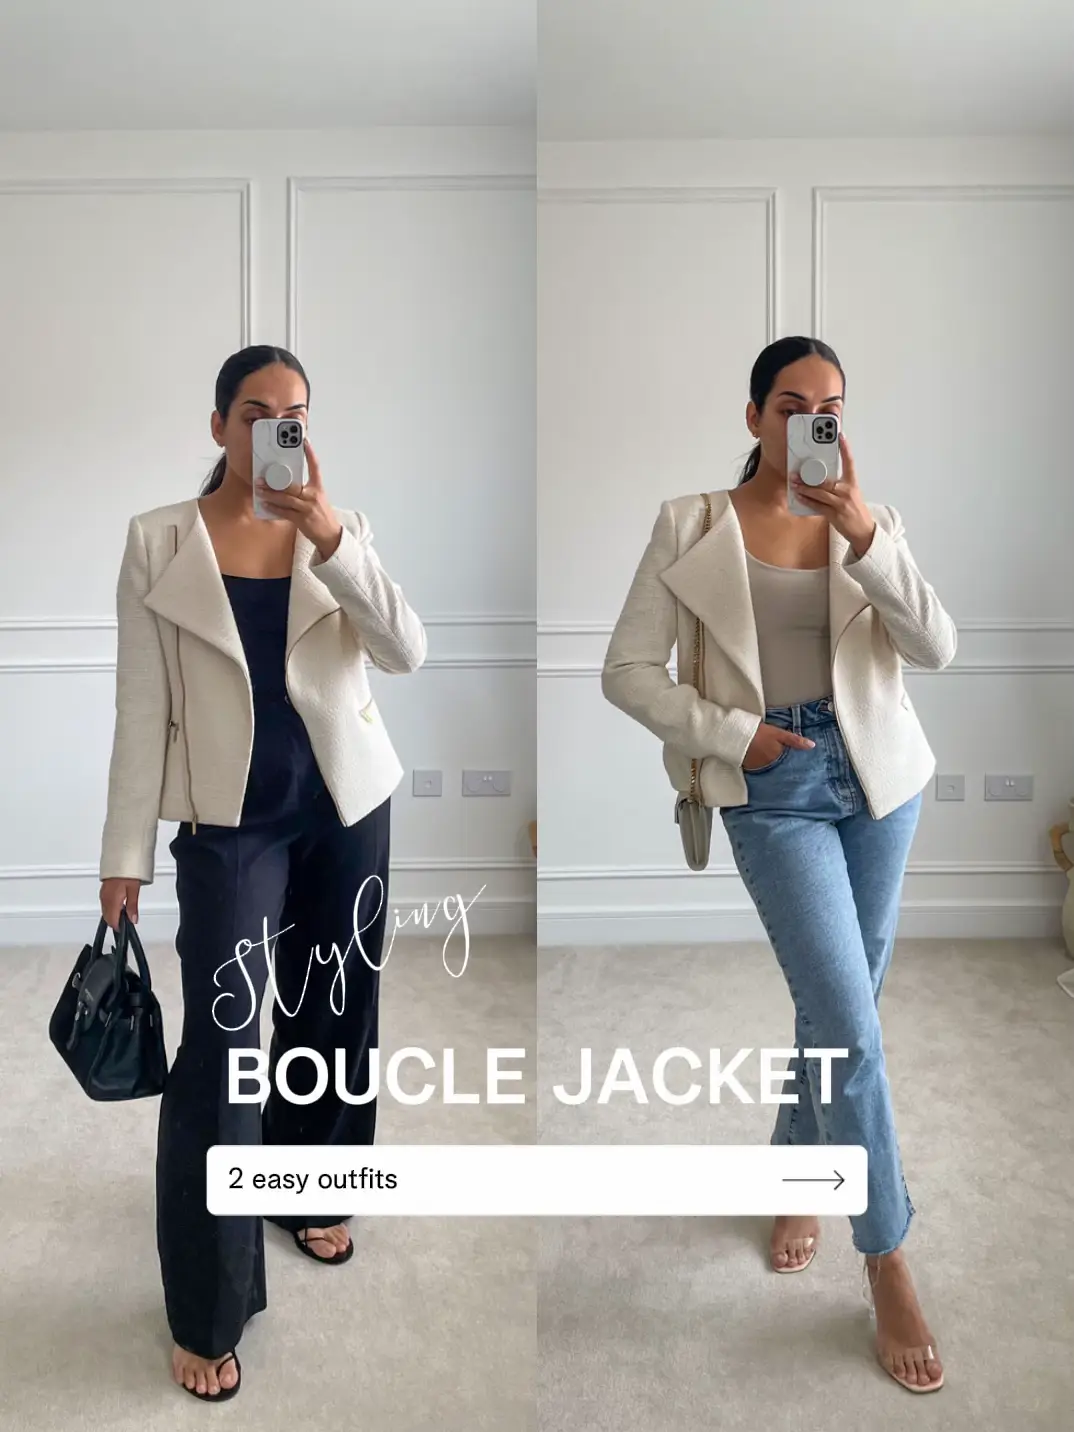 The History of the Bouclé Jacket